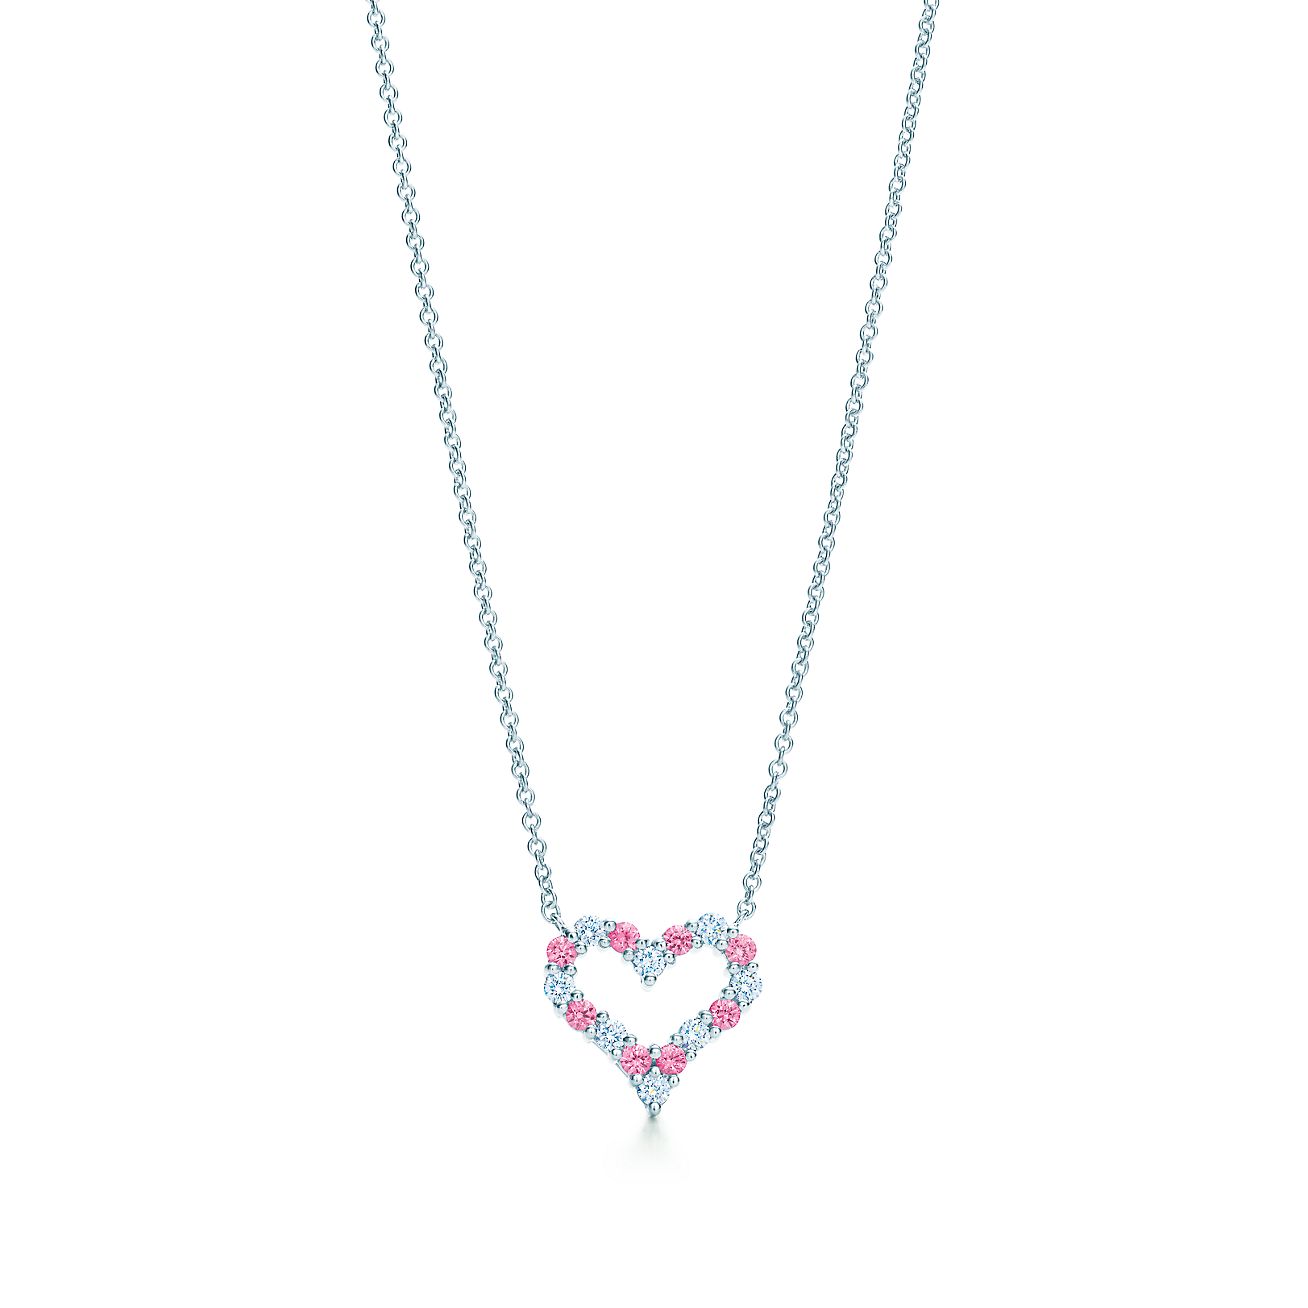 Heart pendant with pink sapphires and 